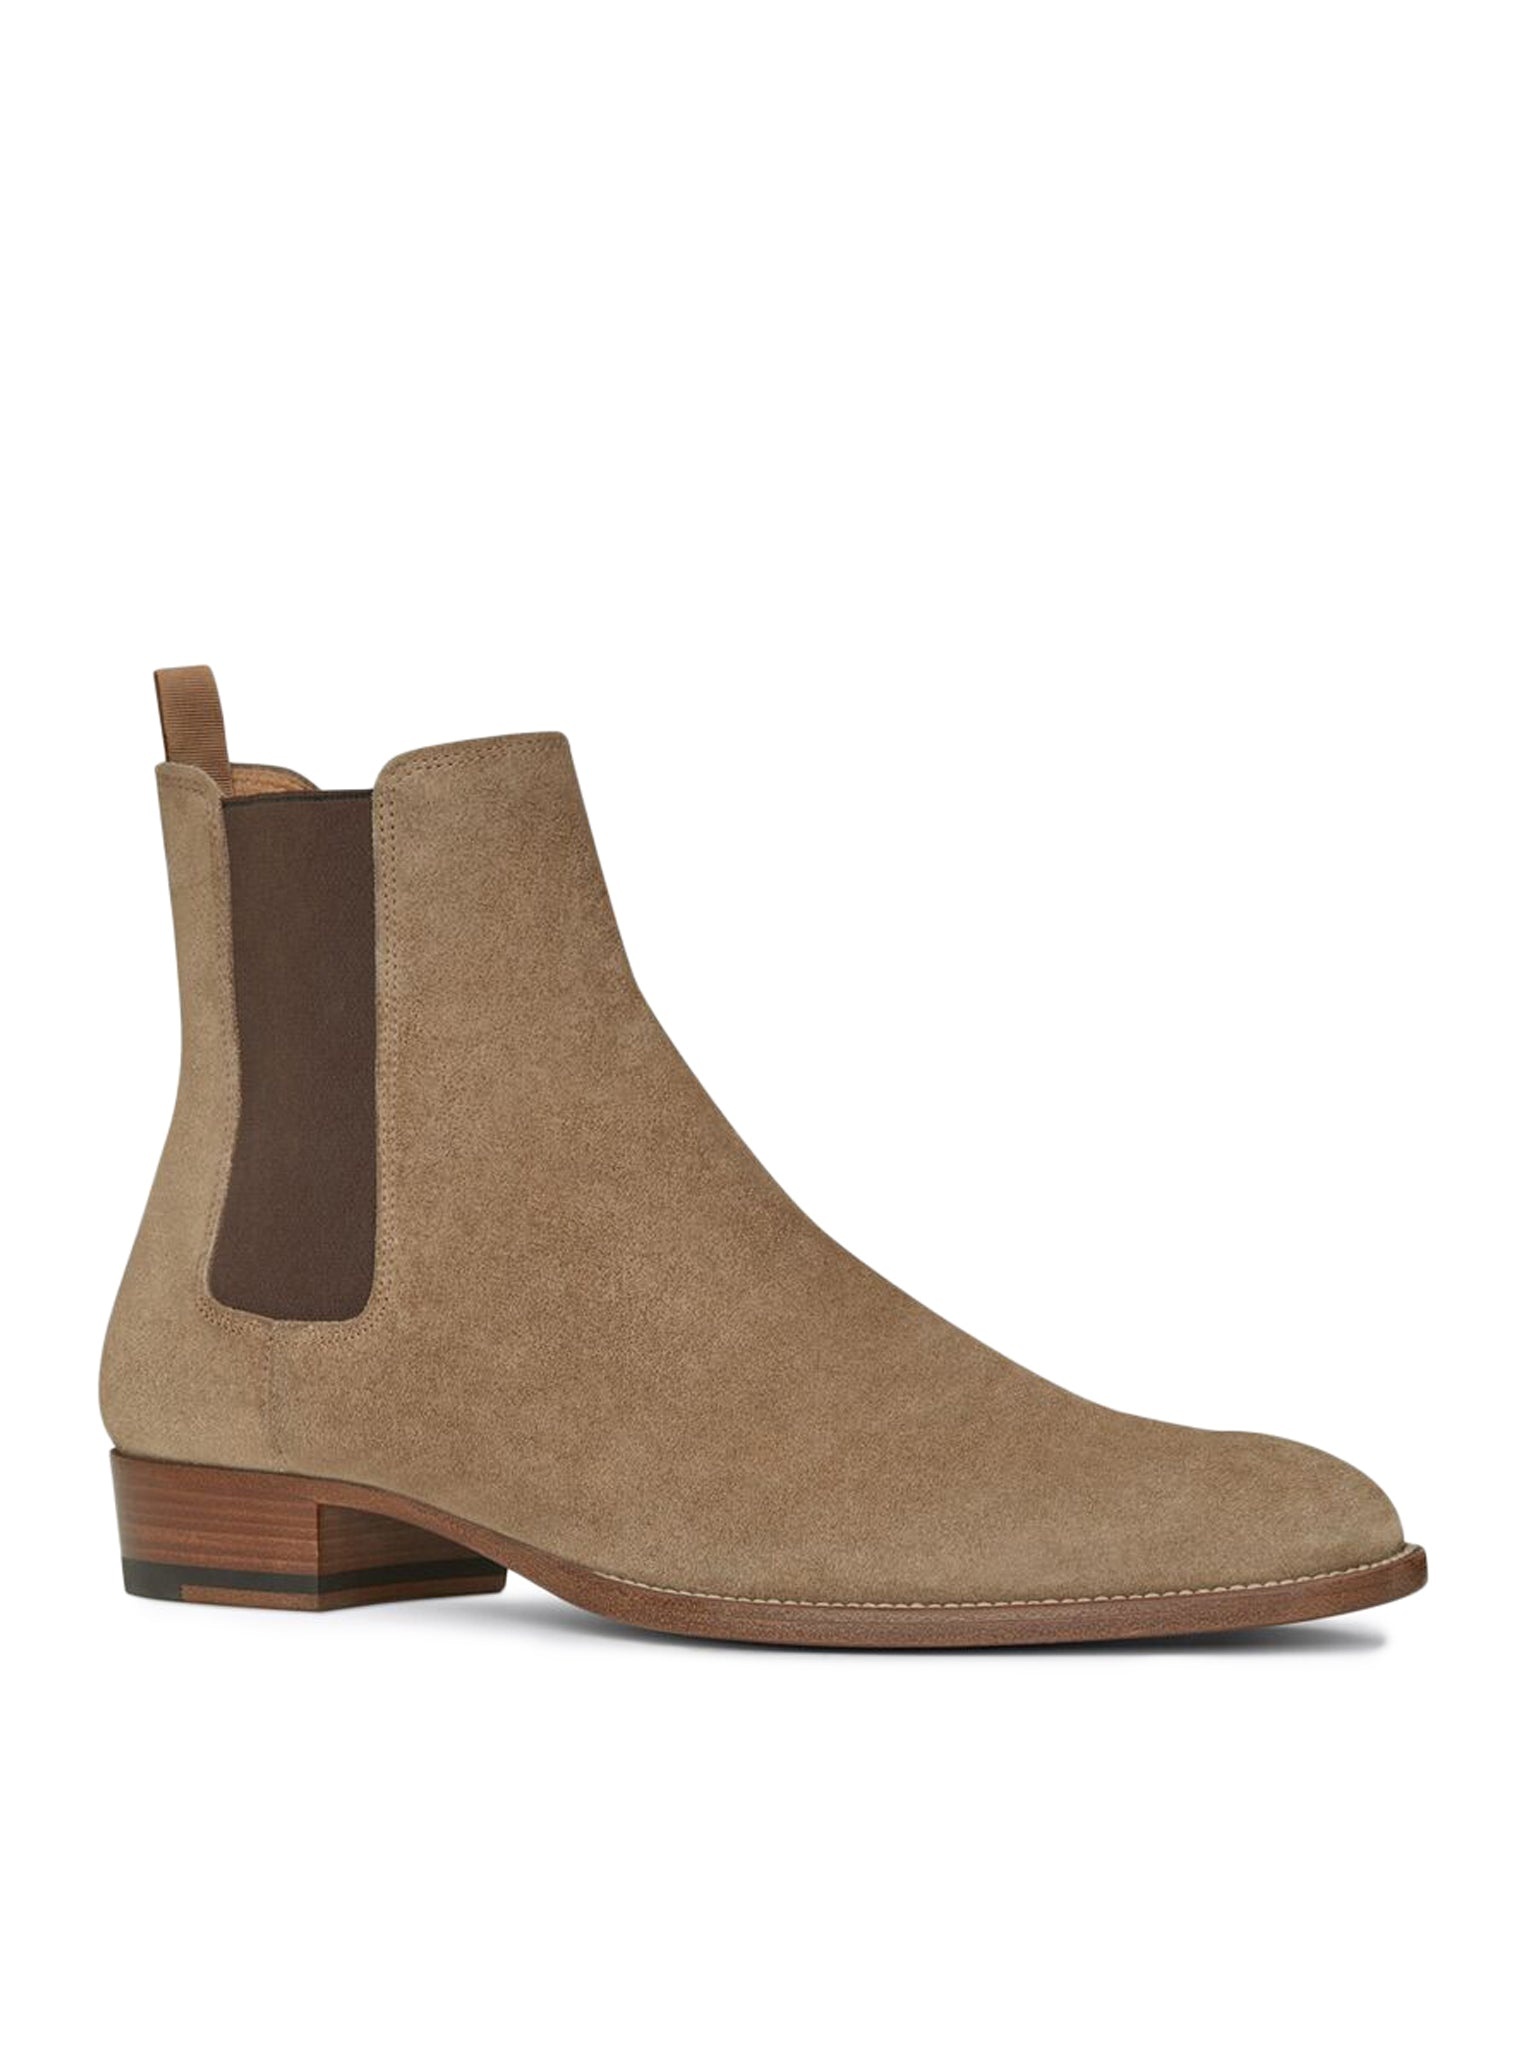 TOBACCO-COLORED WYATT 30 CHELSEA BOOTS IN SUEDE - 2